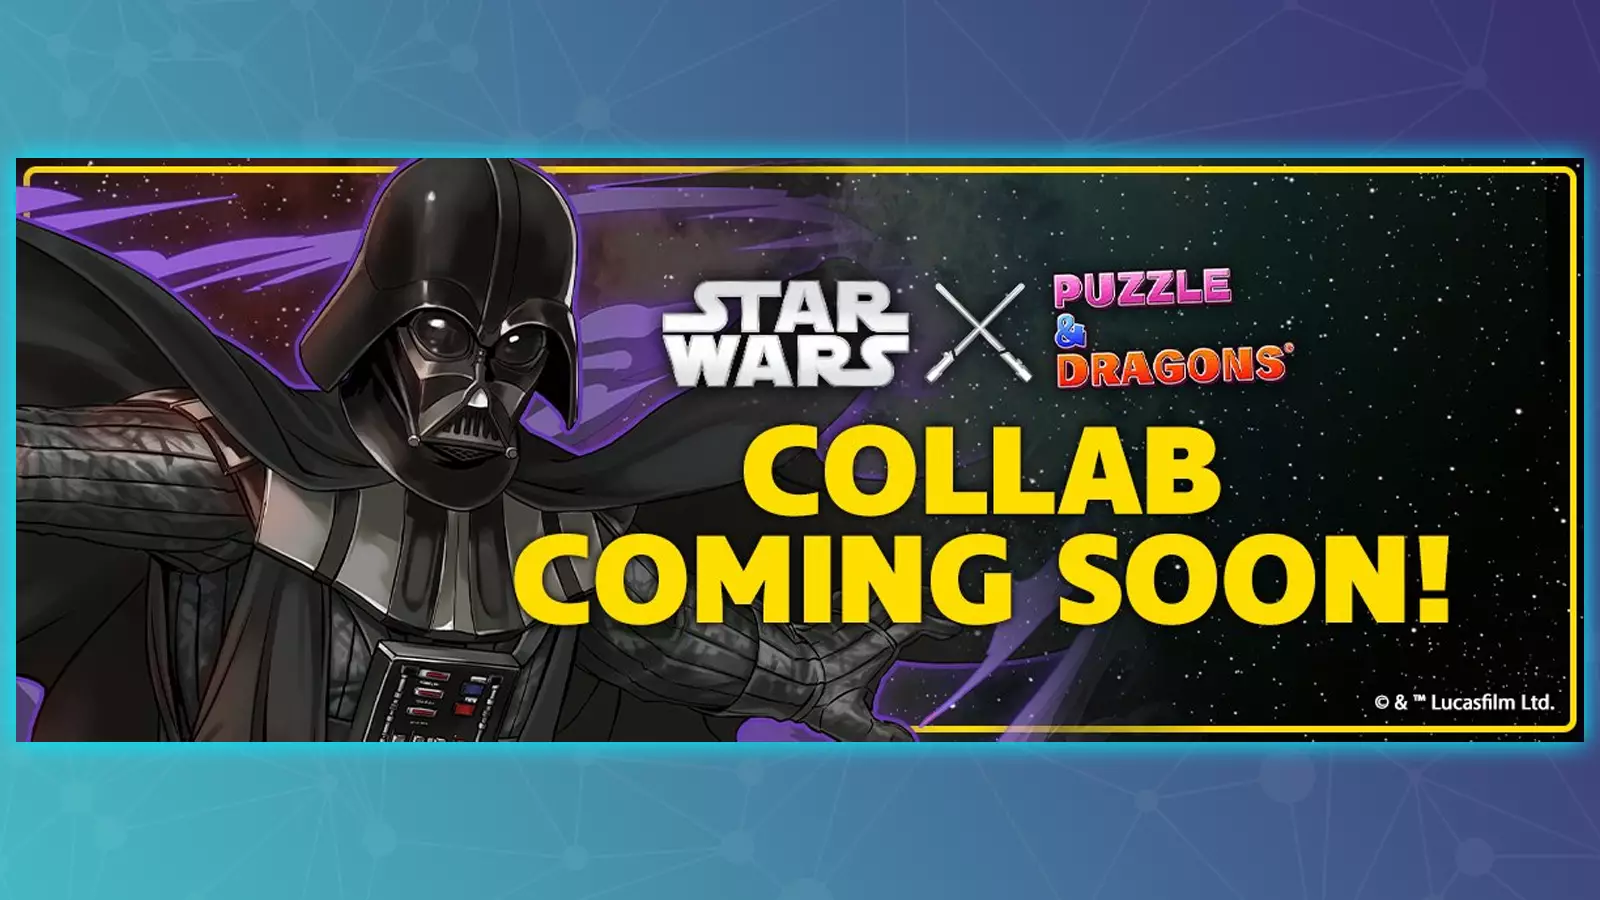 puzzle & dragons and star wars collaboration showing darth vader